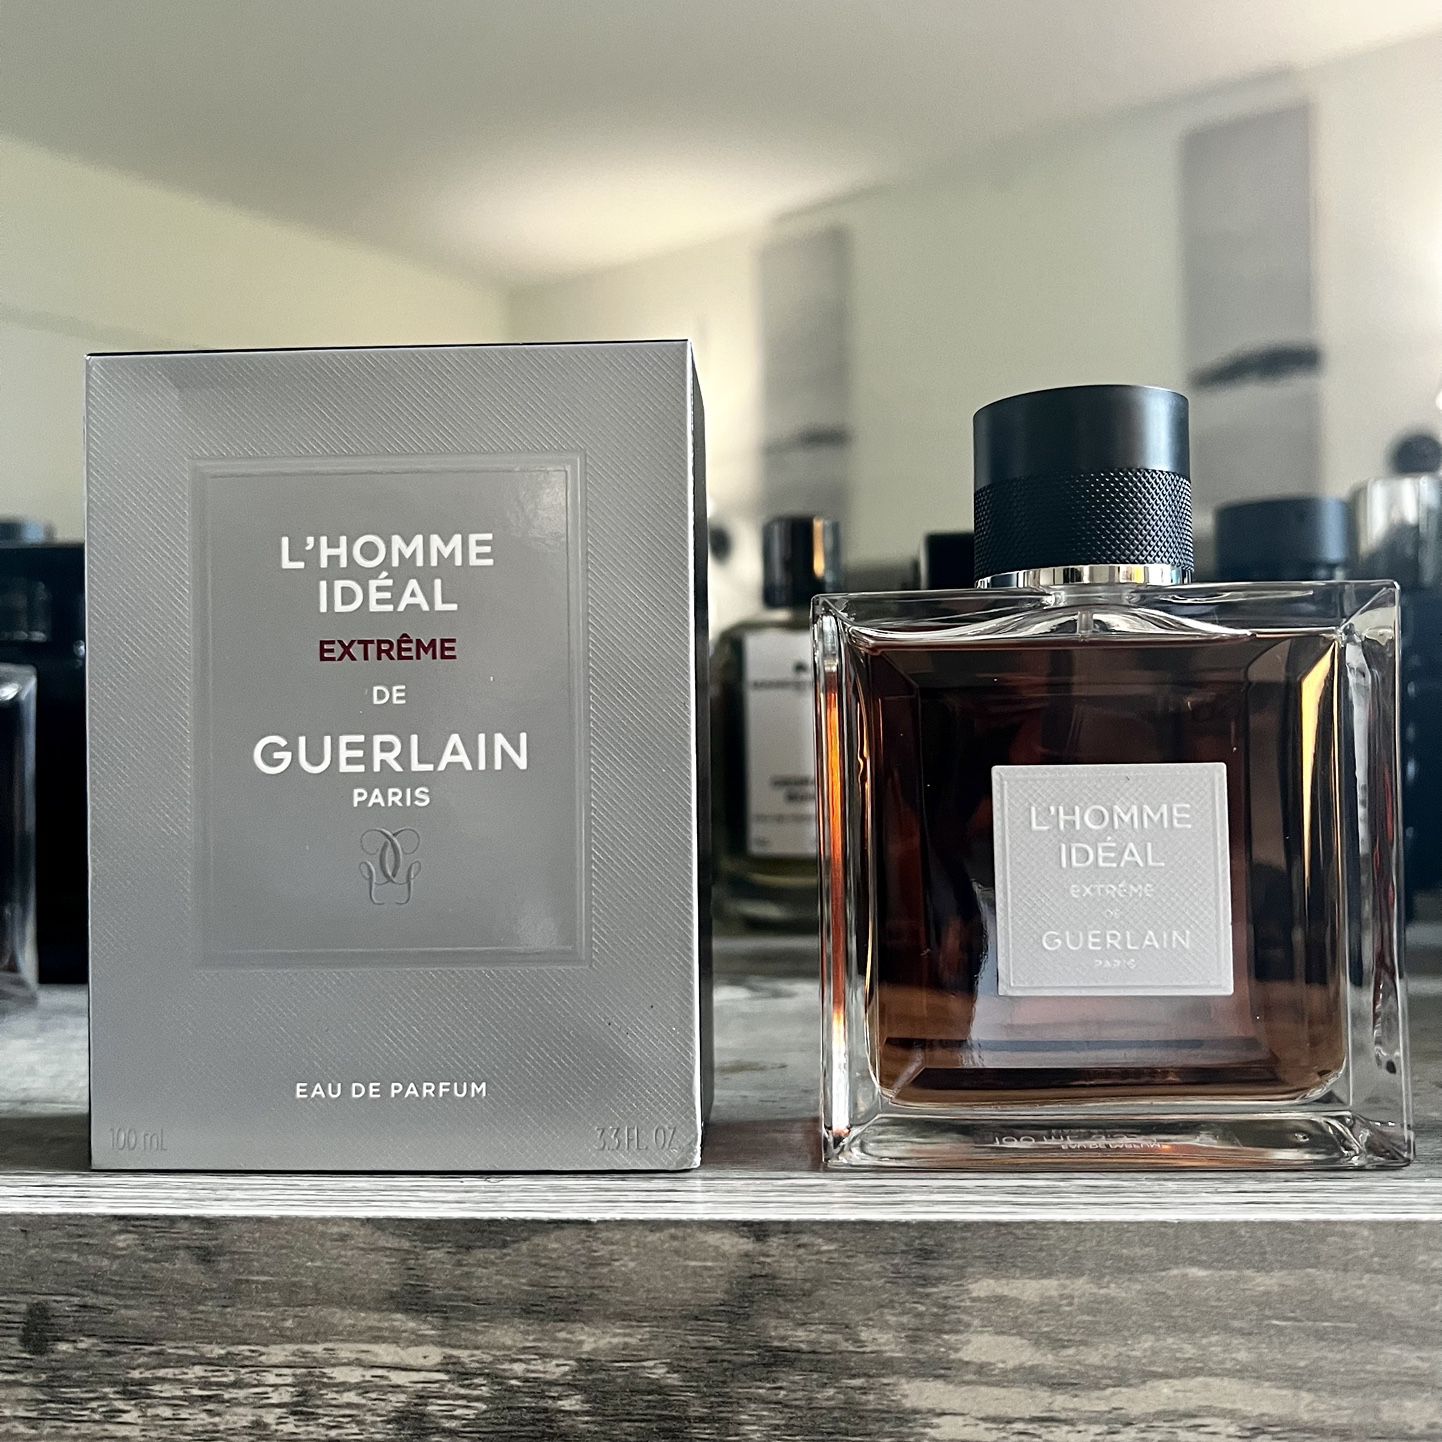 Guerlain L’homme Ideal Extreme 100ML EDP for Sale in North Brunswick  Township, NJ - OfferUp